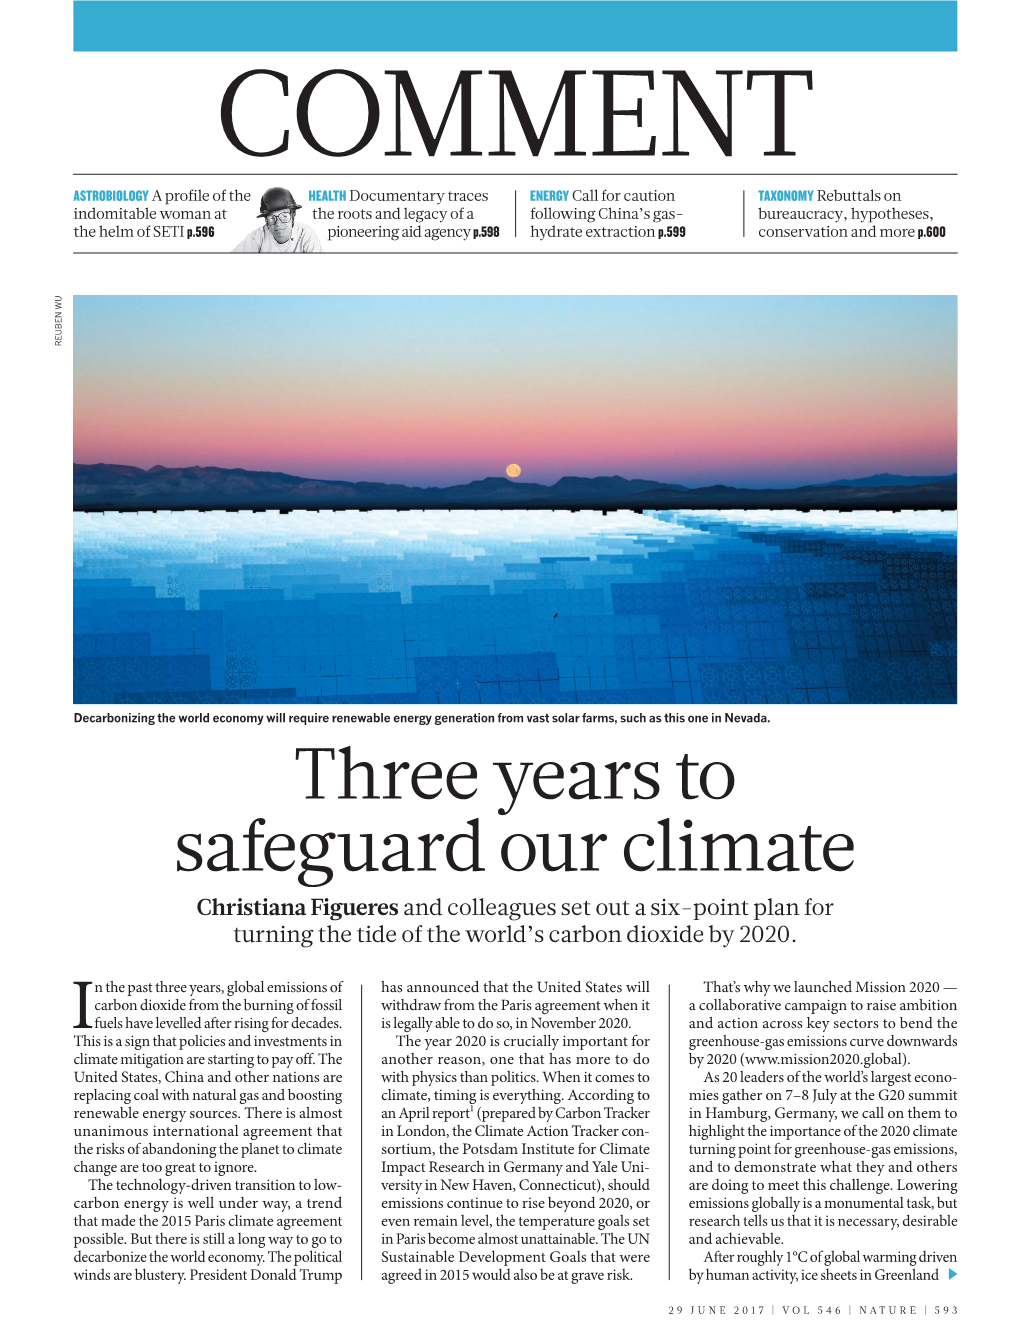 Three Years to Safeguard Our Climate Christiana Figueres and Colleagues Set out a Six-Point Plan for Turning the Tide of the World’S Carbon Dioxide by 2020